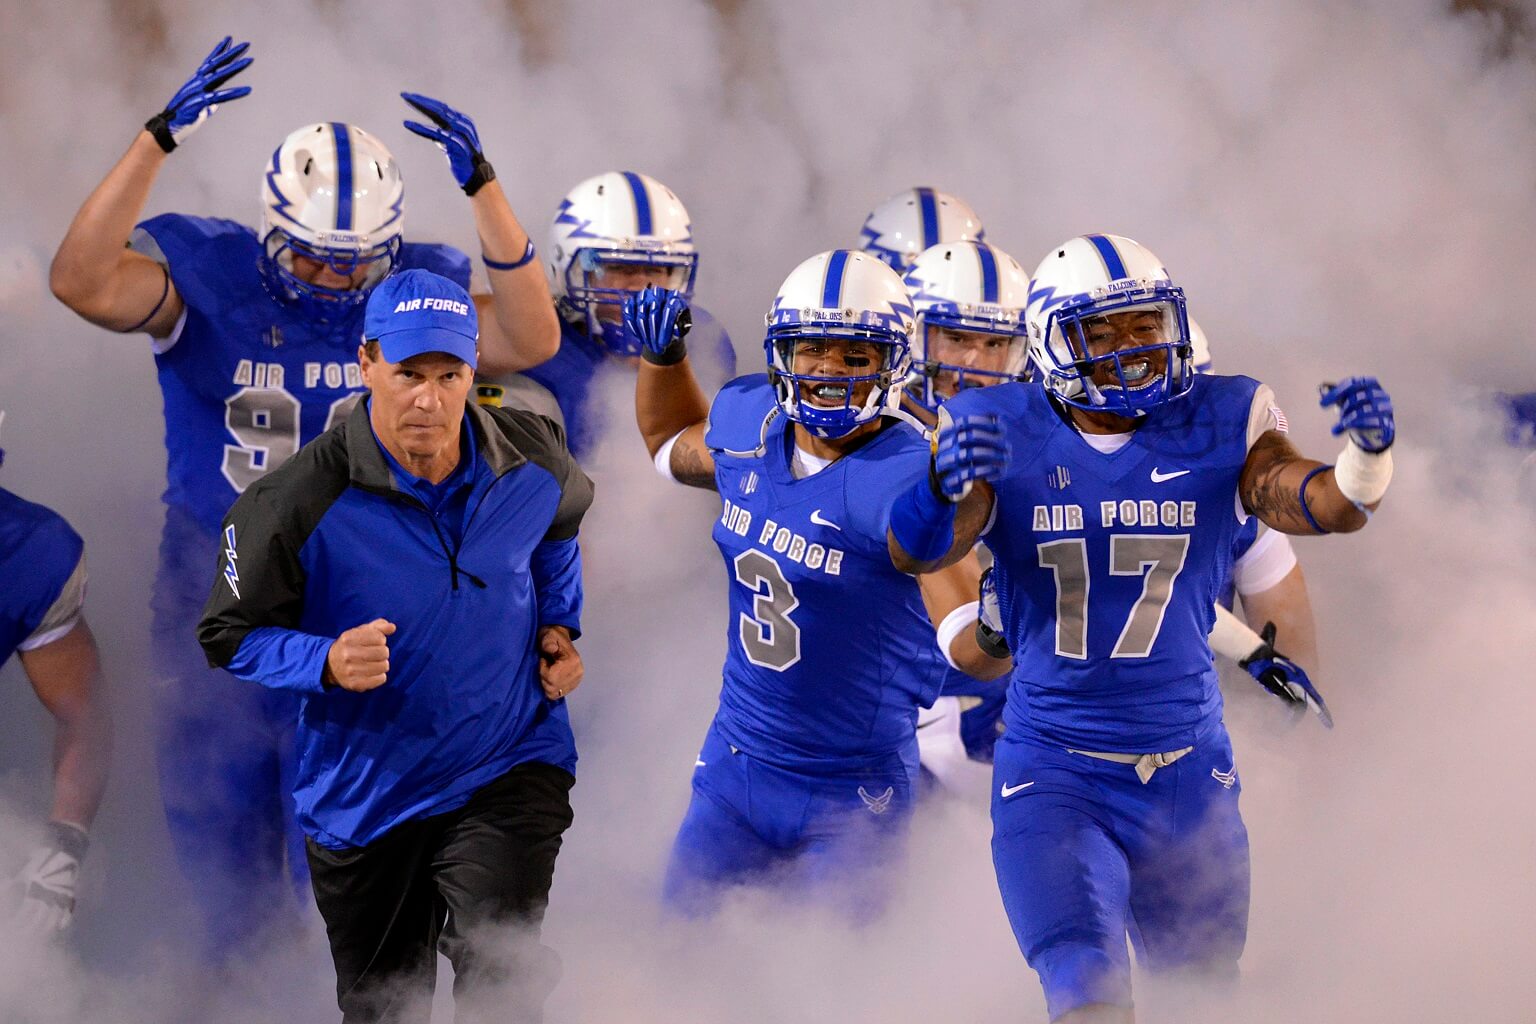 Coach and AF football team in smoke